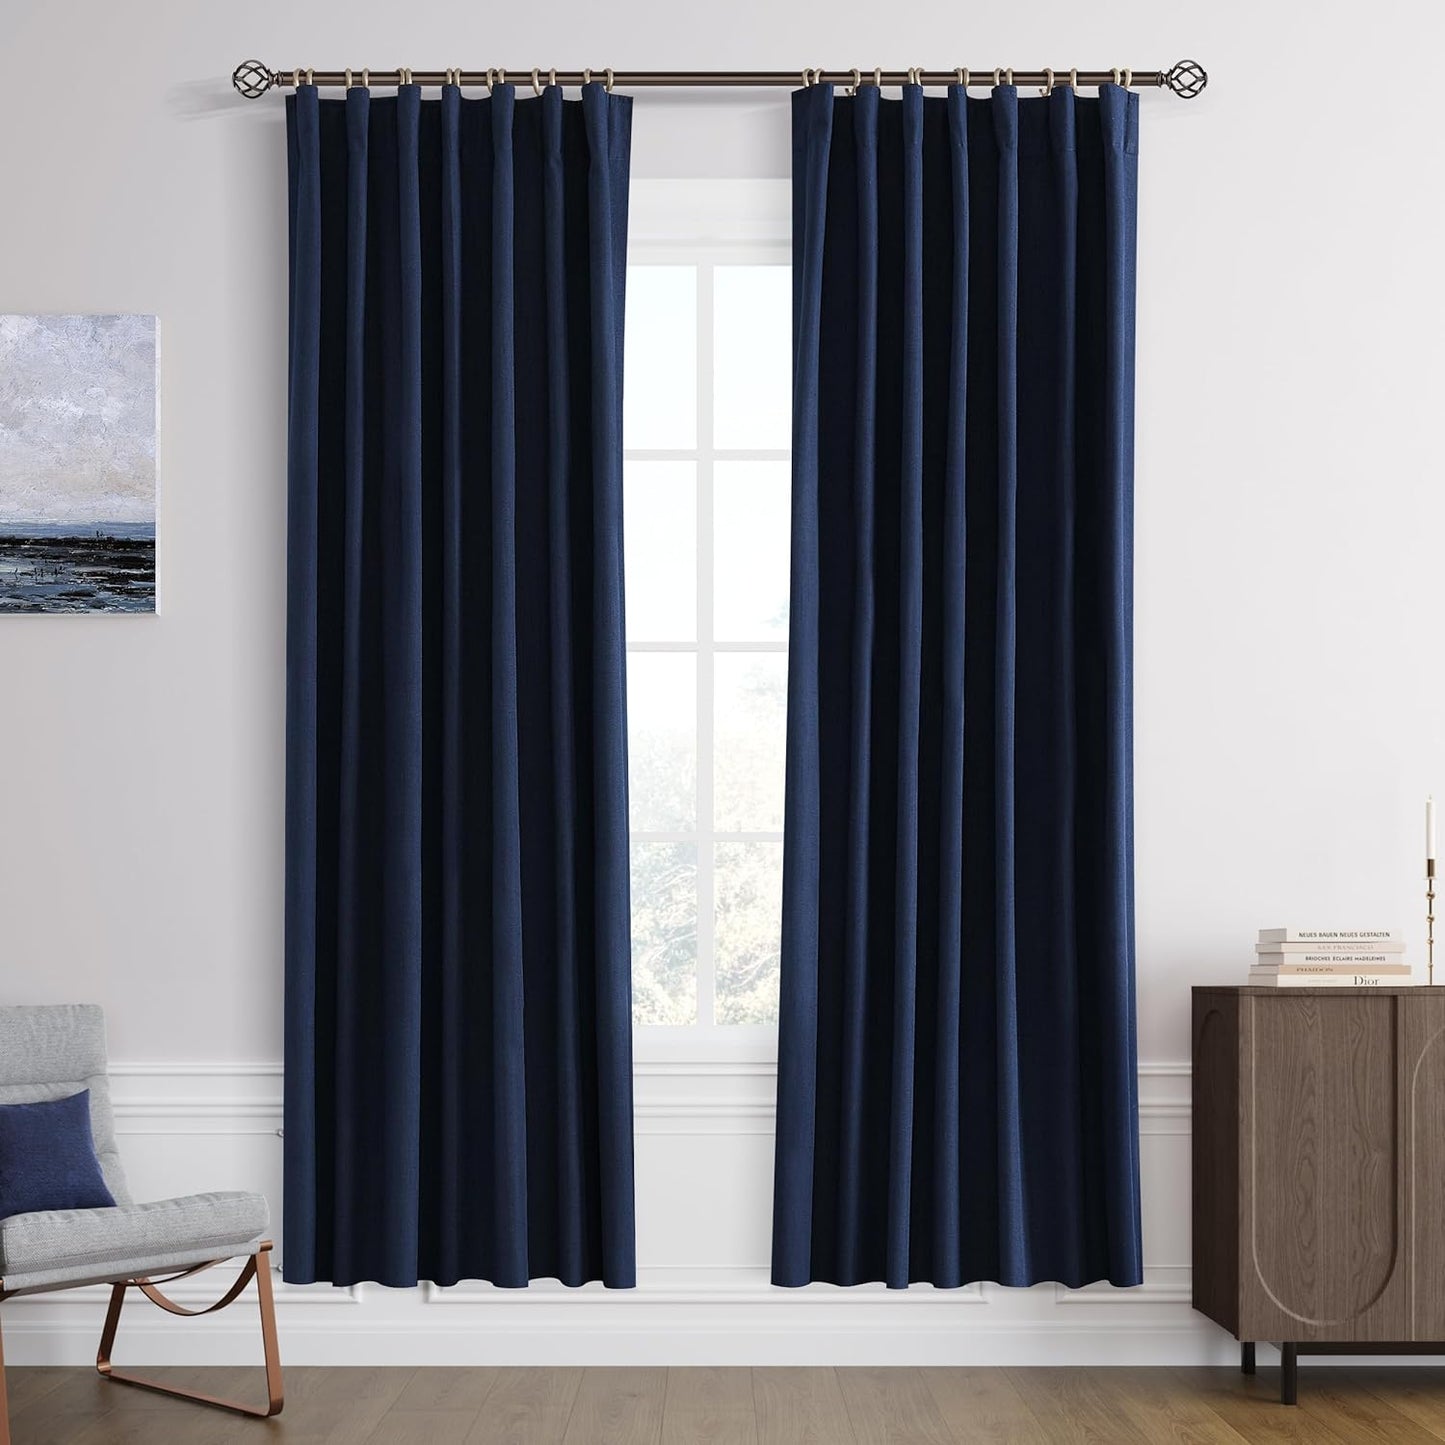 Joywell 100% Blackout Linen Curtains 102 Inches Long, Rod Pocket/Back Tab/Hook Belt/Clip Rings, Thermal Insulated Floor Length Drapes for Bedroom Dining Living Room(2 Panels,W52 X L102,Linen)  Joywell Navy Blue 52W X 78L Inch X 2 Panels 